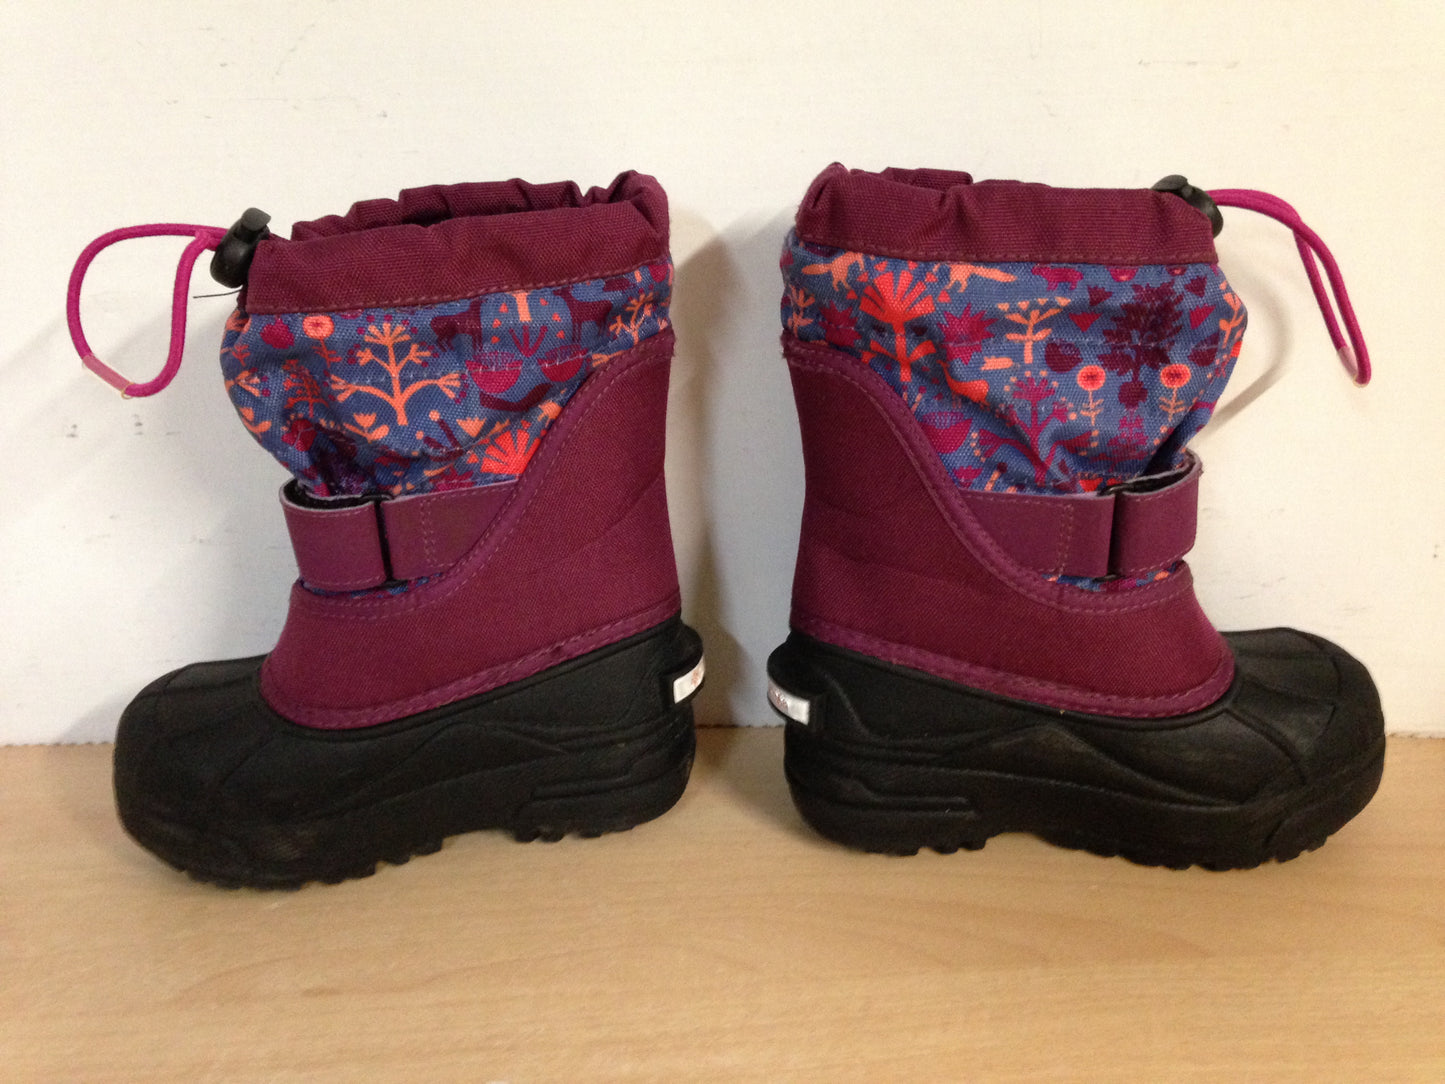 Winter Boots Child Size 10 Columbia Fushia  Black With Liner Excellent